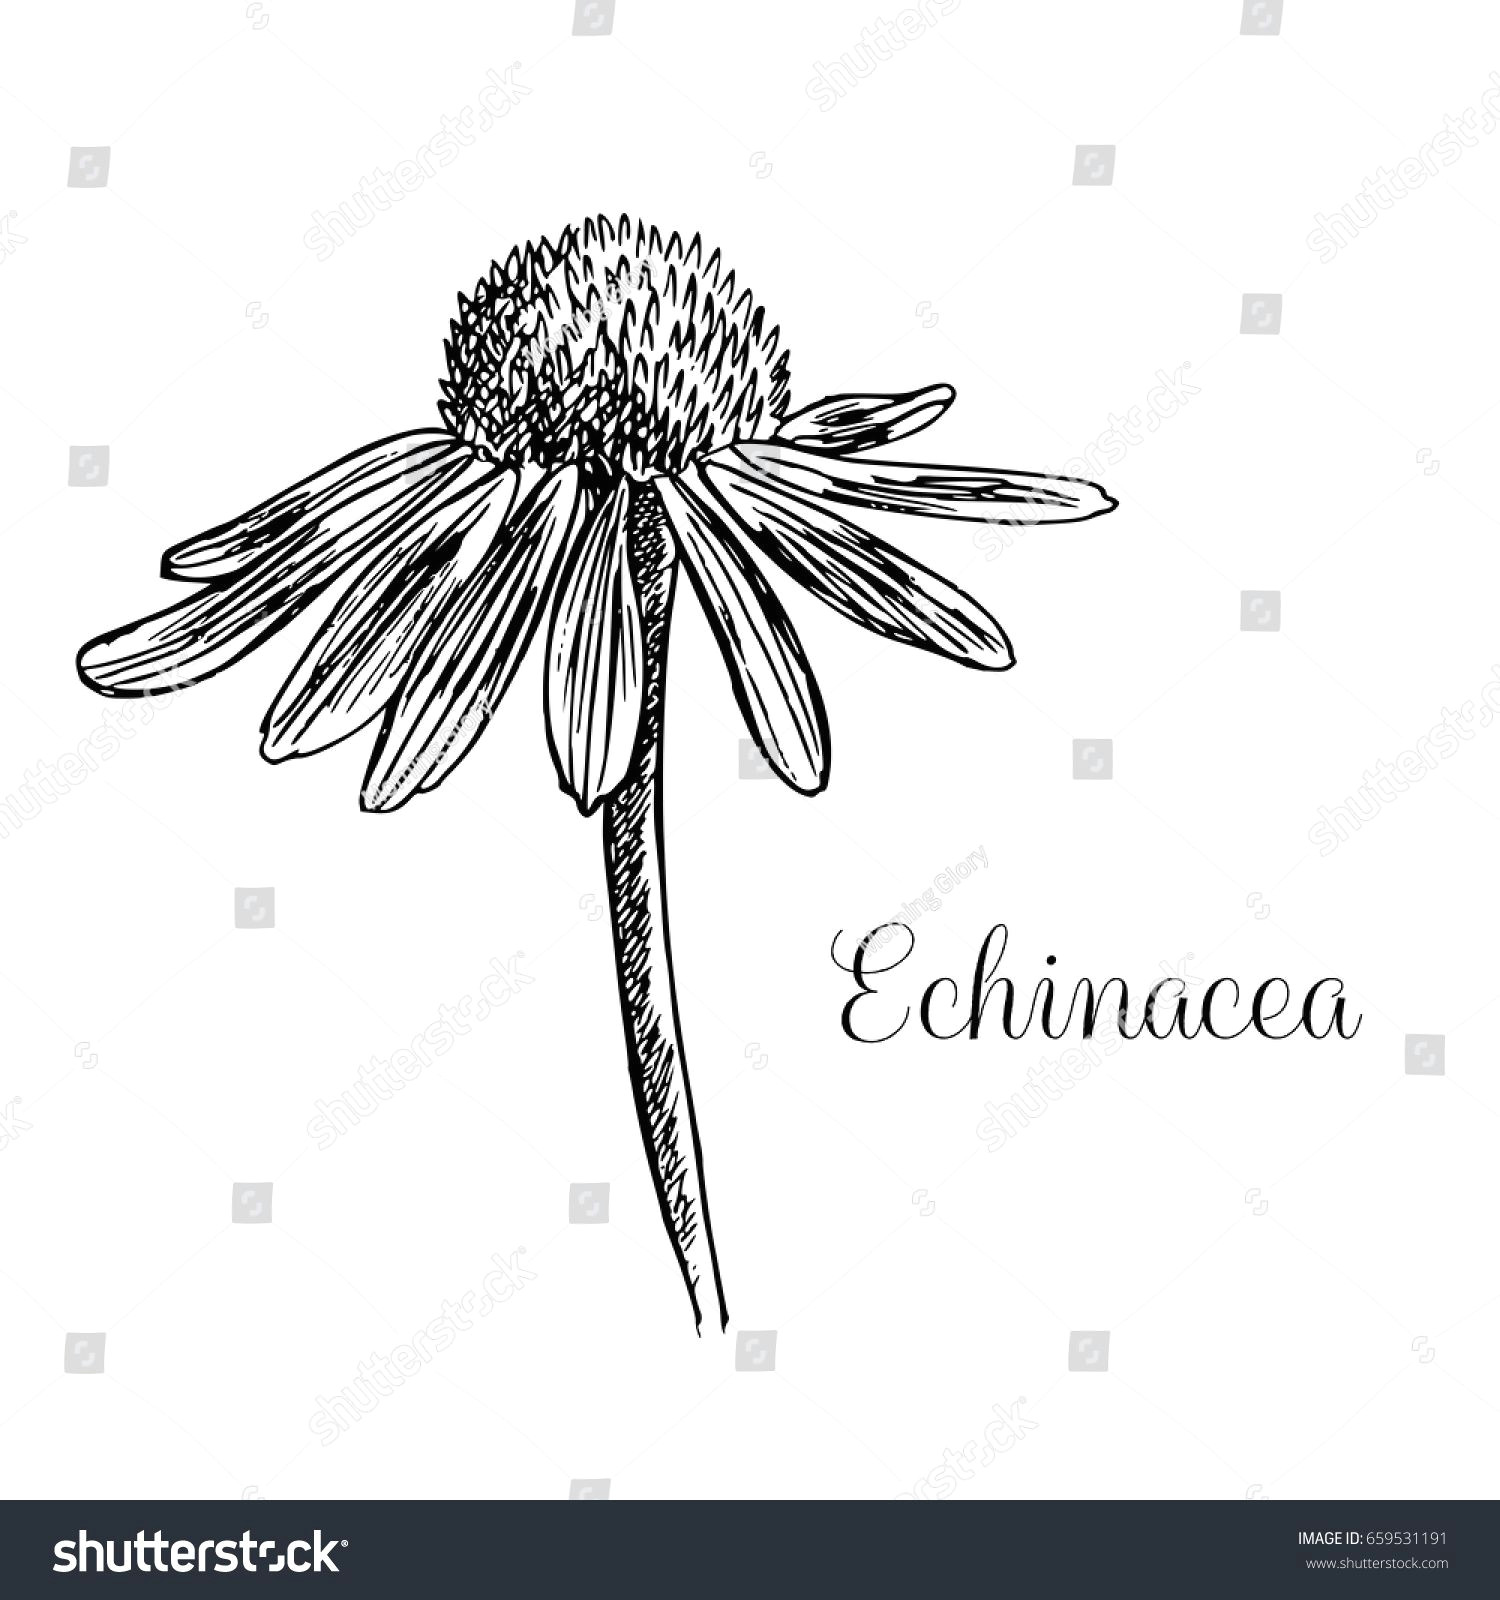 image result for echinacea line